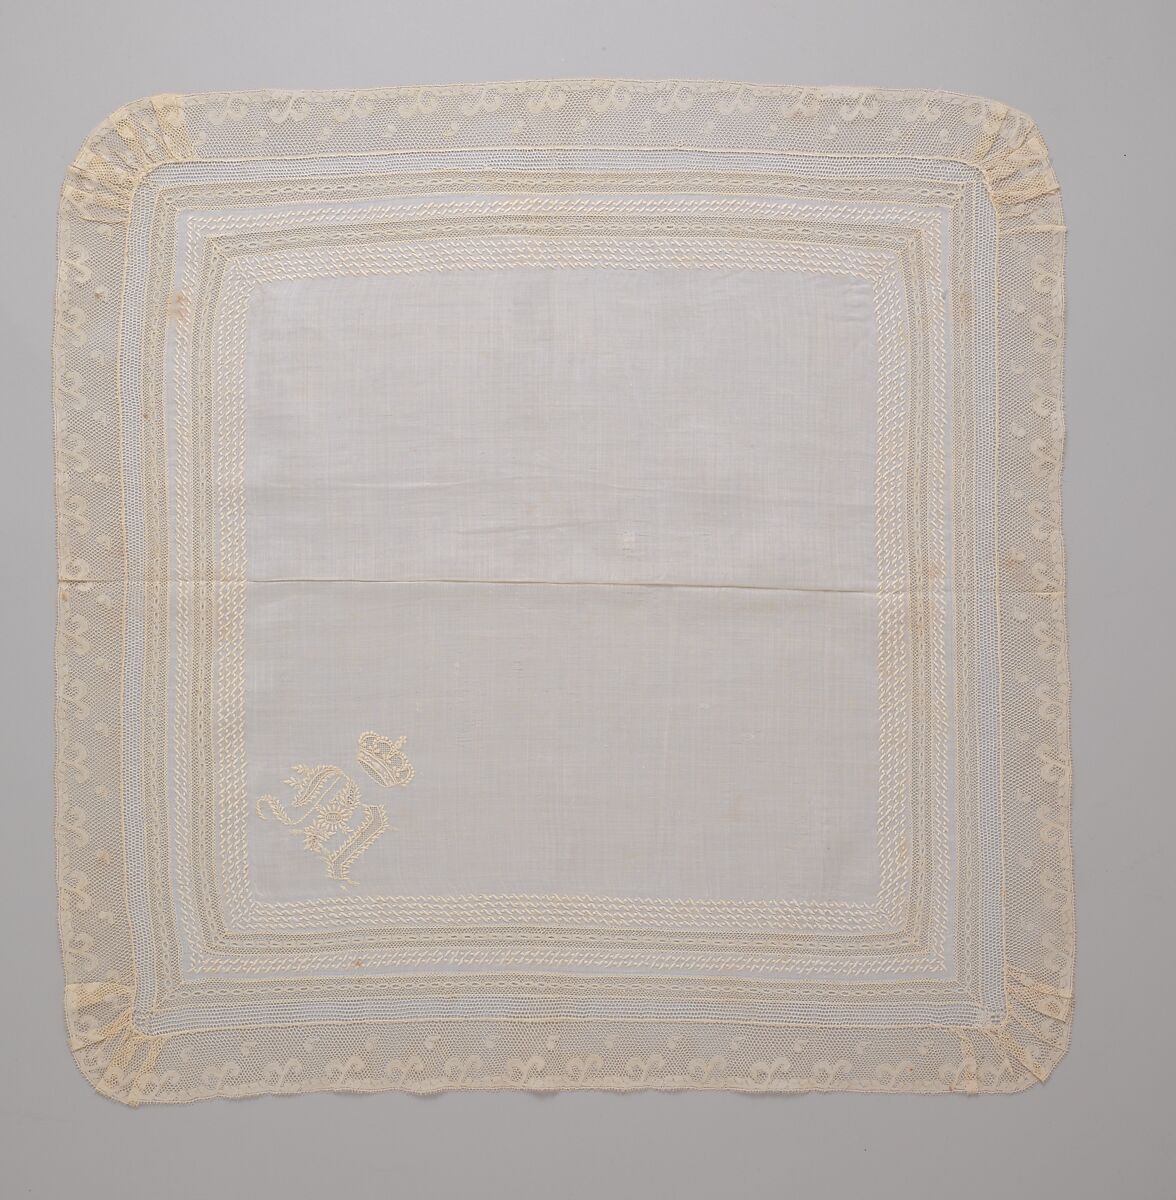 Handkerchief, Cotton, French or Swiss 